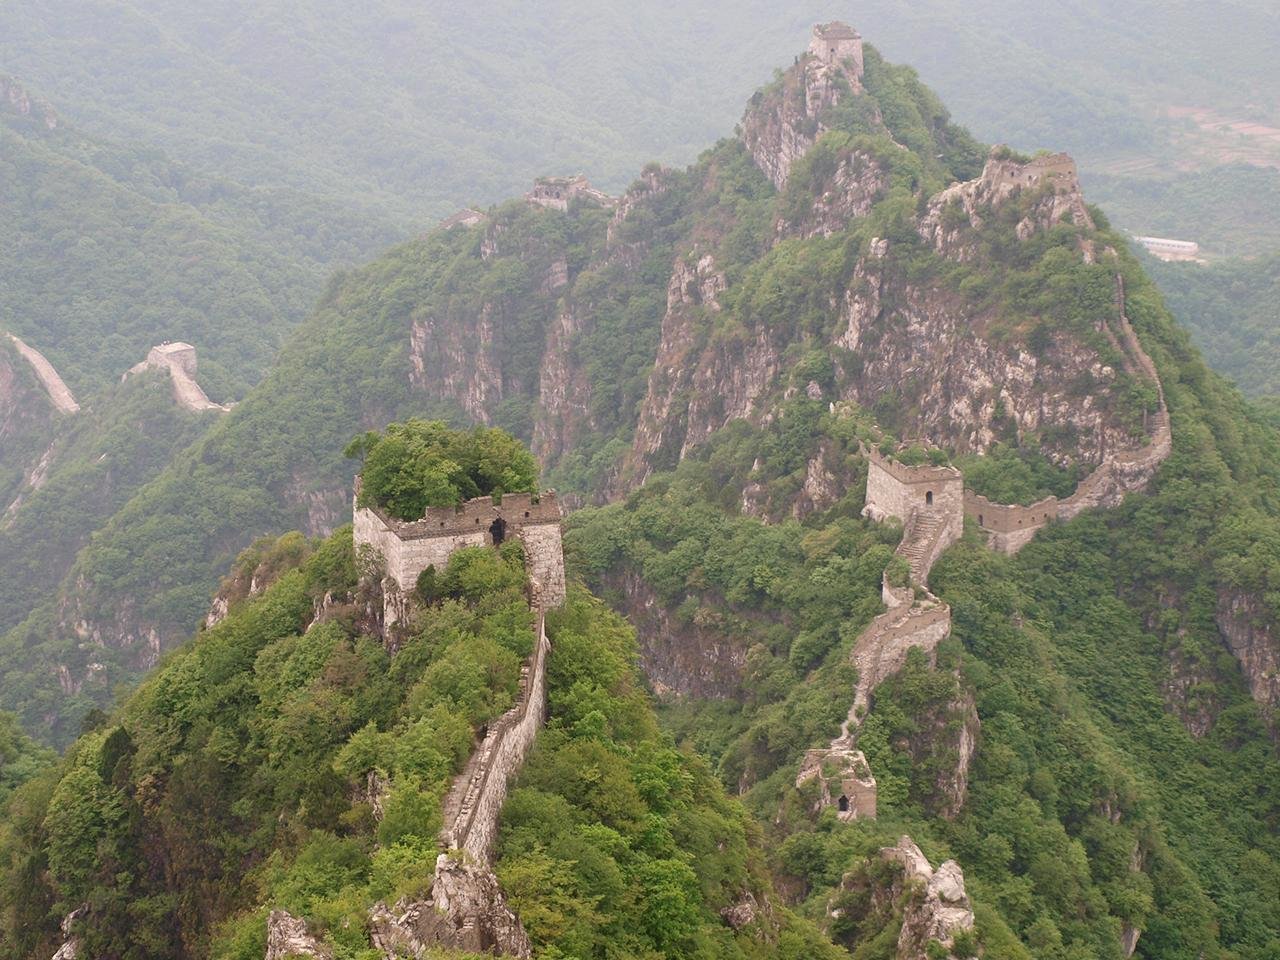 Dragon sculpture discovered along Great Wall of China